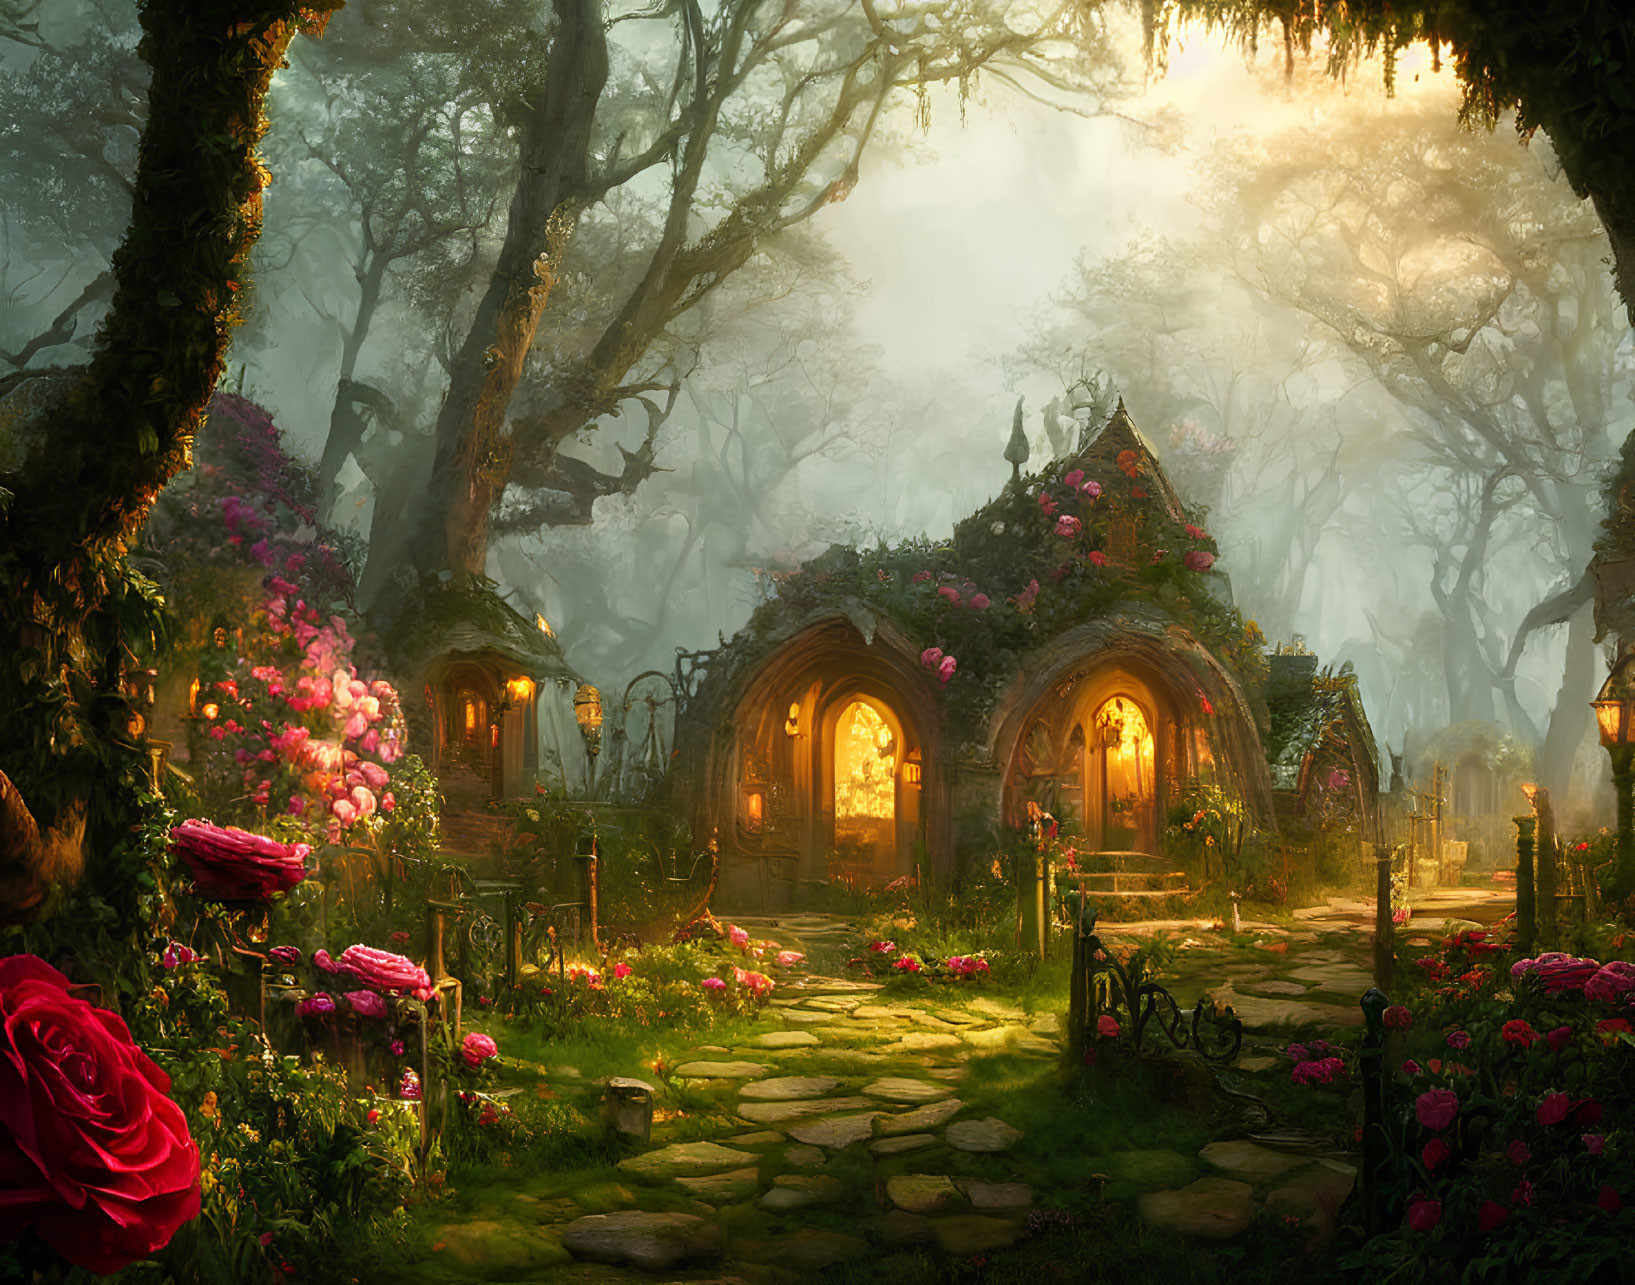 Mystical forest scene with glowing cottages and pink roses